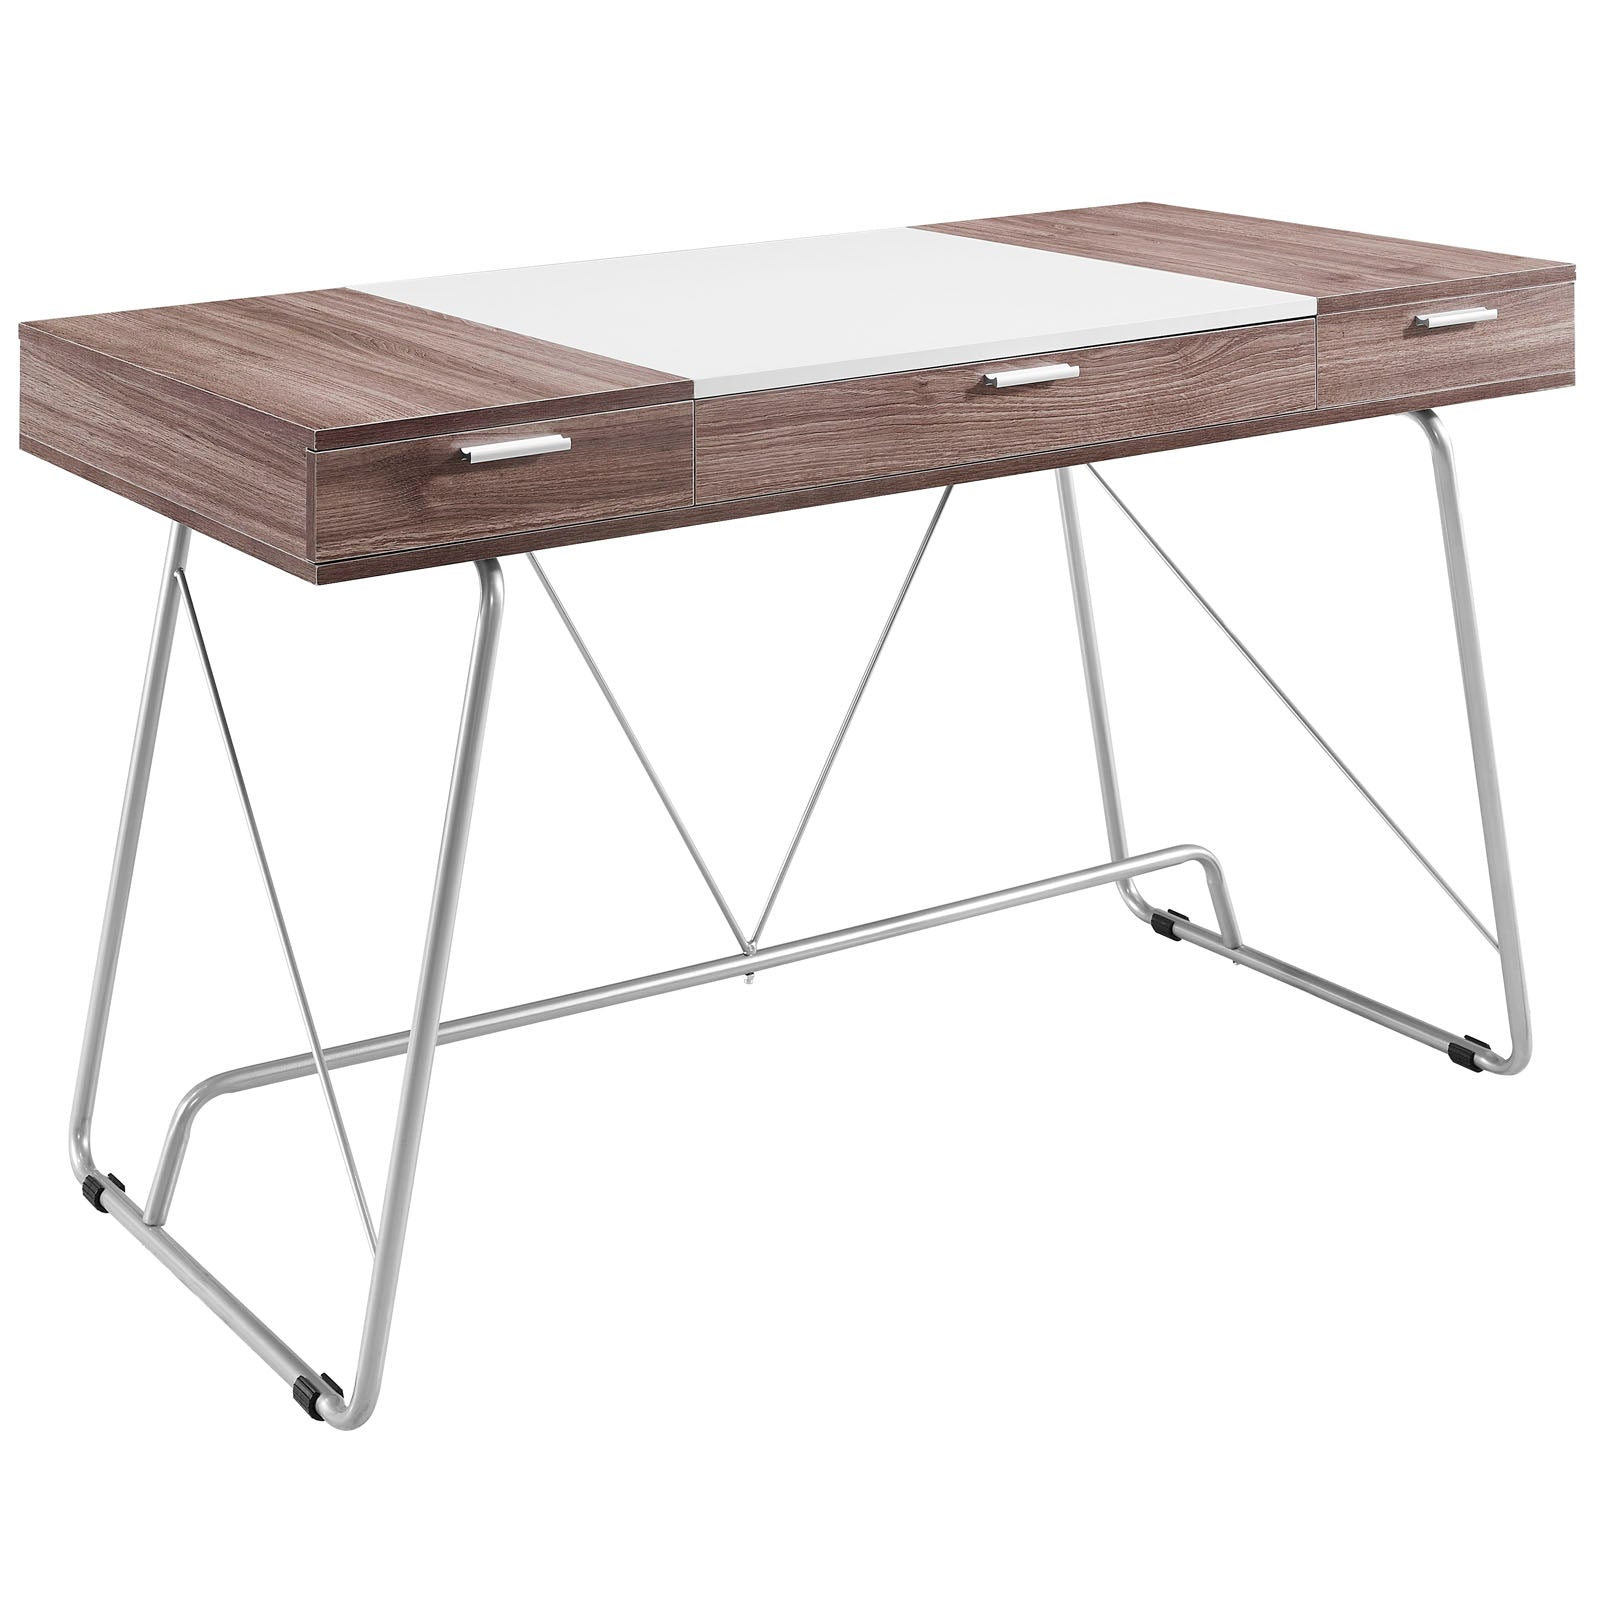 Shop Panel Office Desk for Contemporary Office Designs at BUILDMyplace